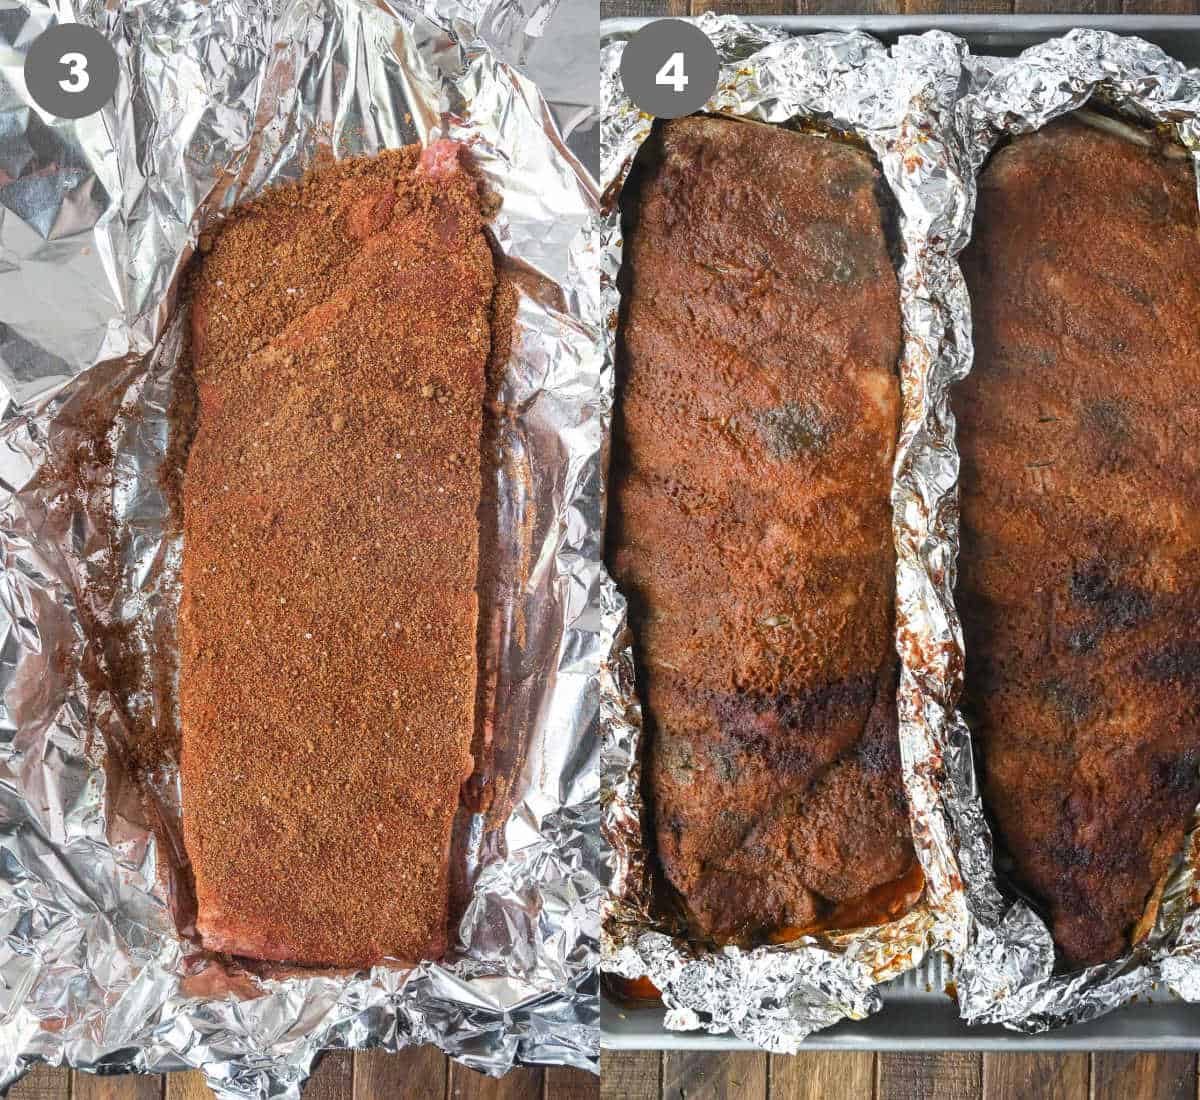 The spice mixture rubbed on top of the pork ribs wrapped tightly in foil and baked.